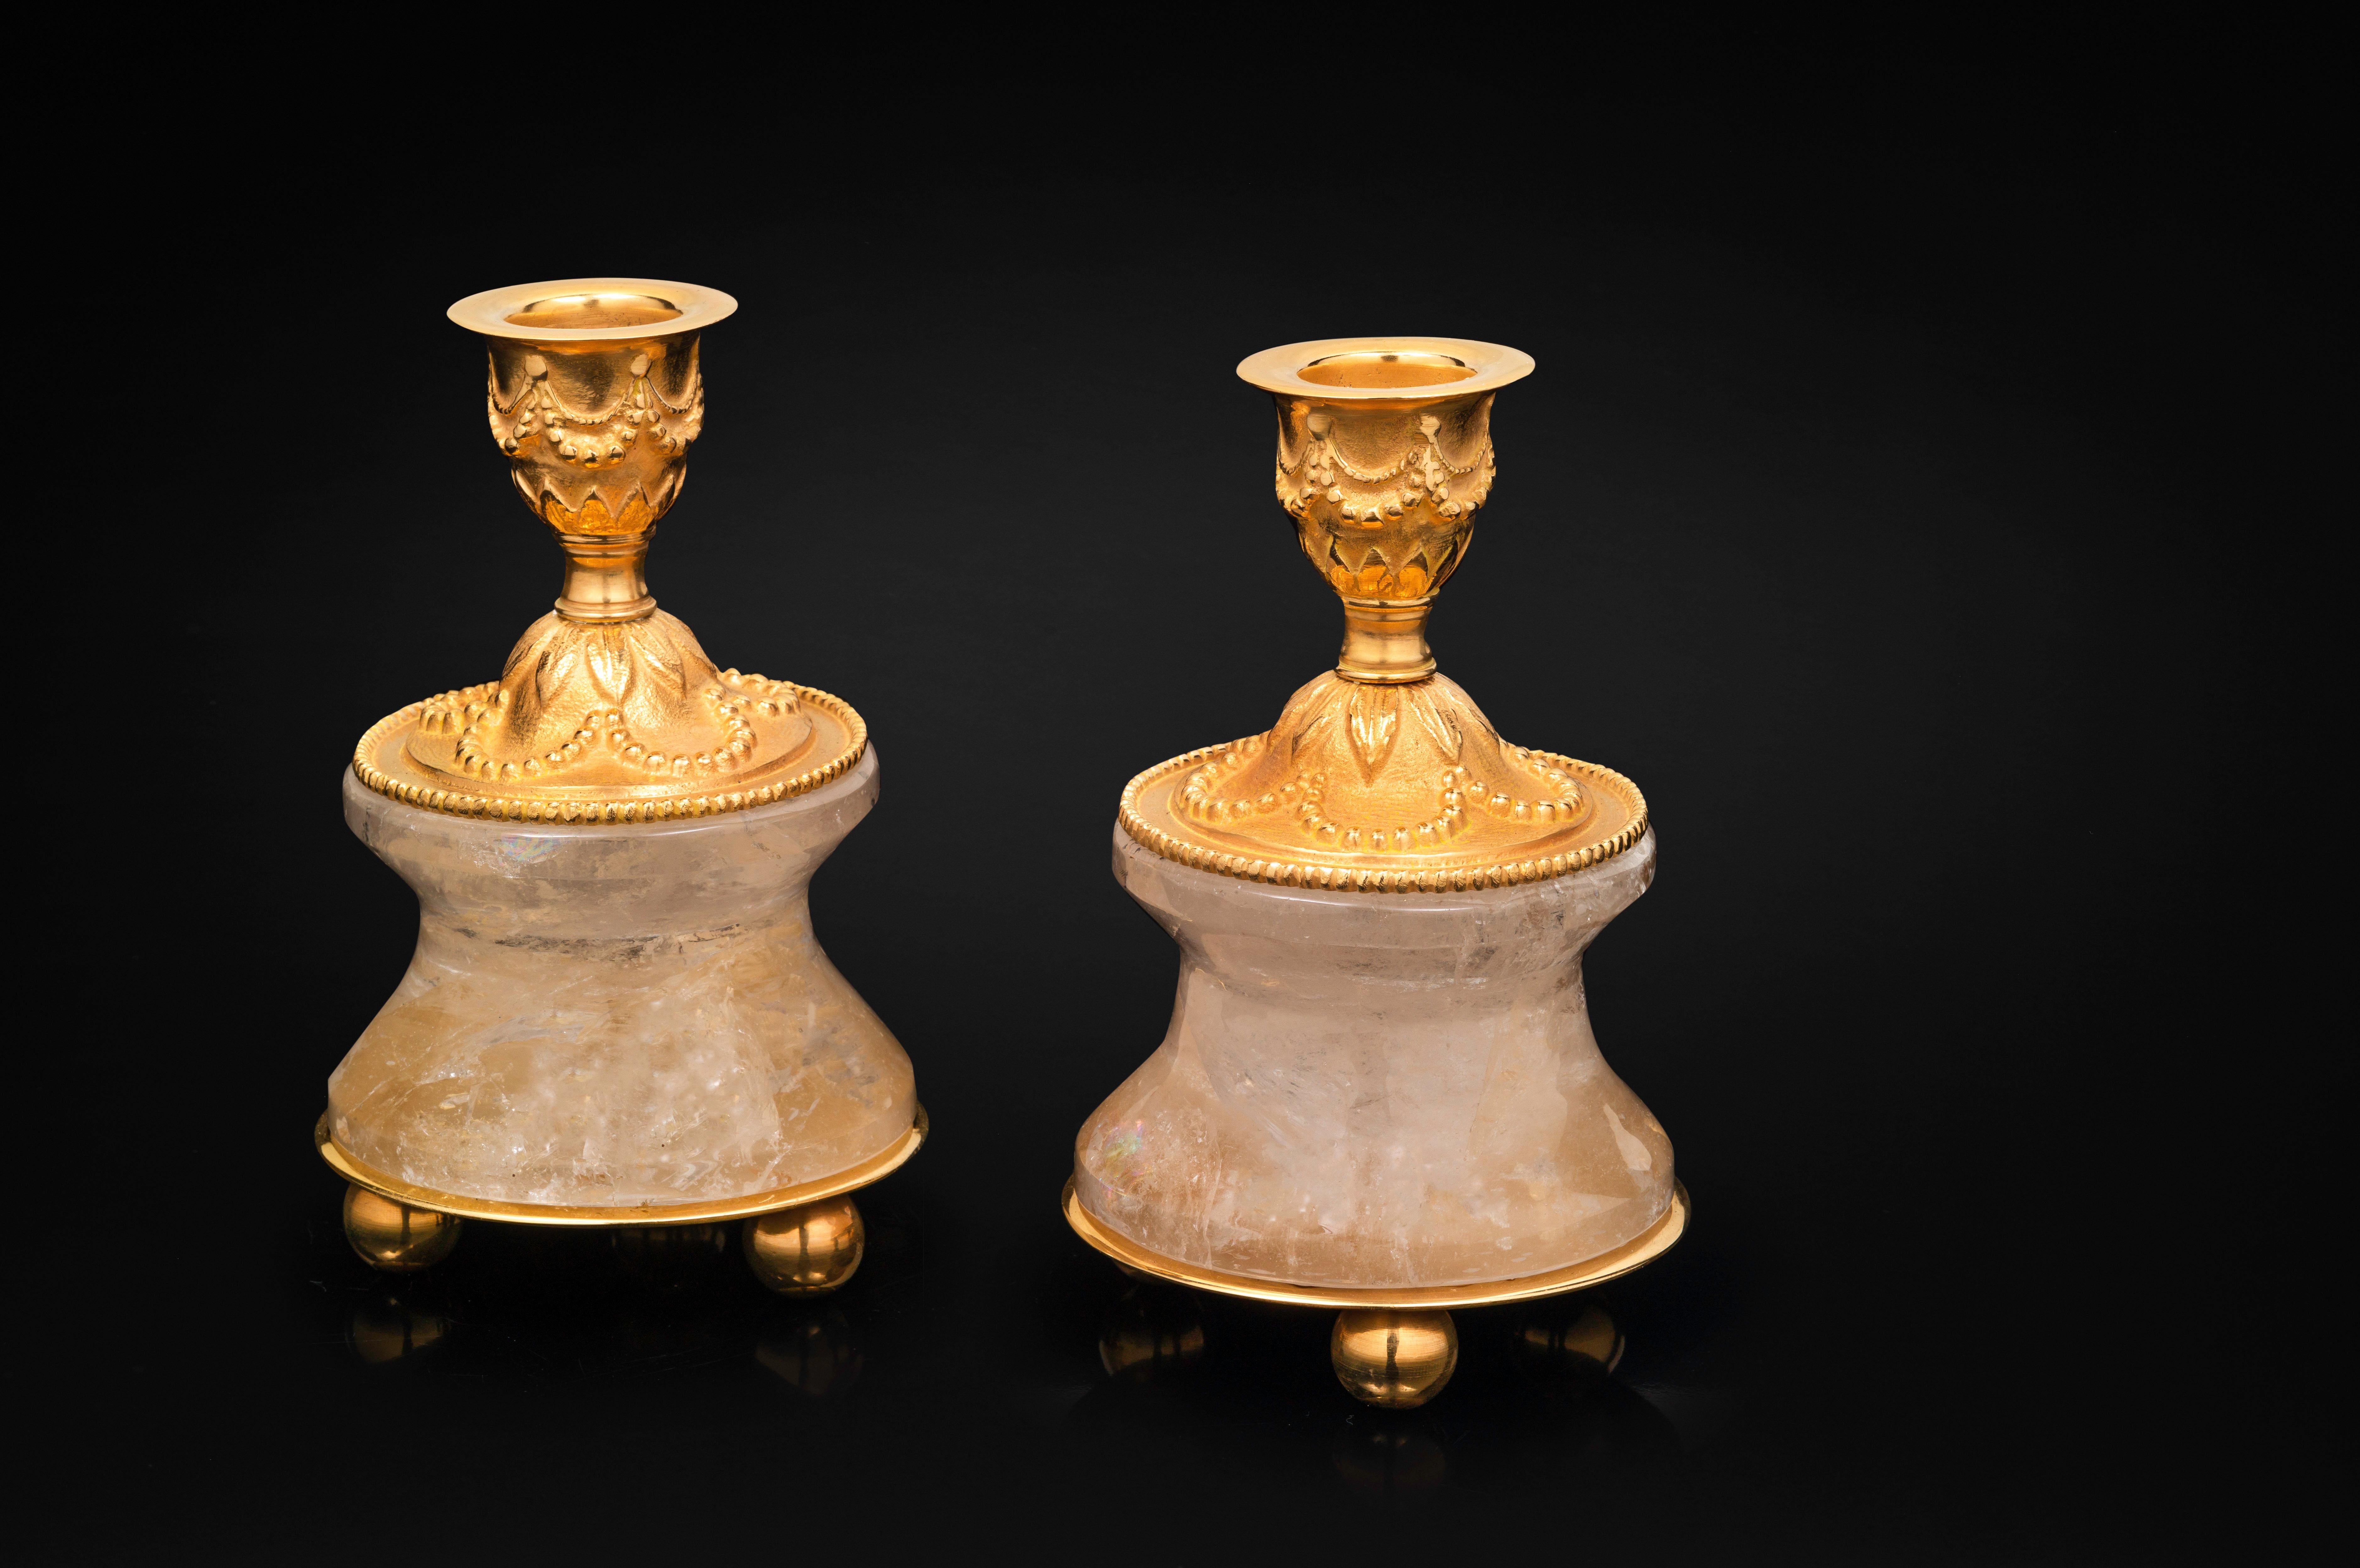 Hand-Carved Pair of Rock Crystal and Gilt-Bronze Lamps /Candlesticks Louis XVI Style For Sale